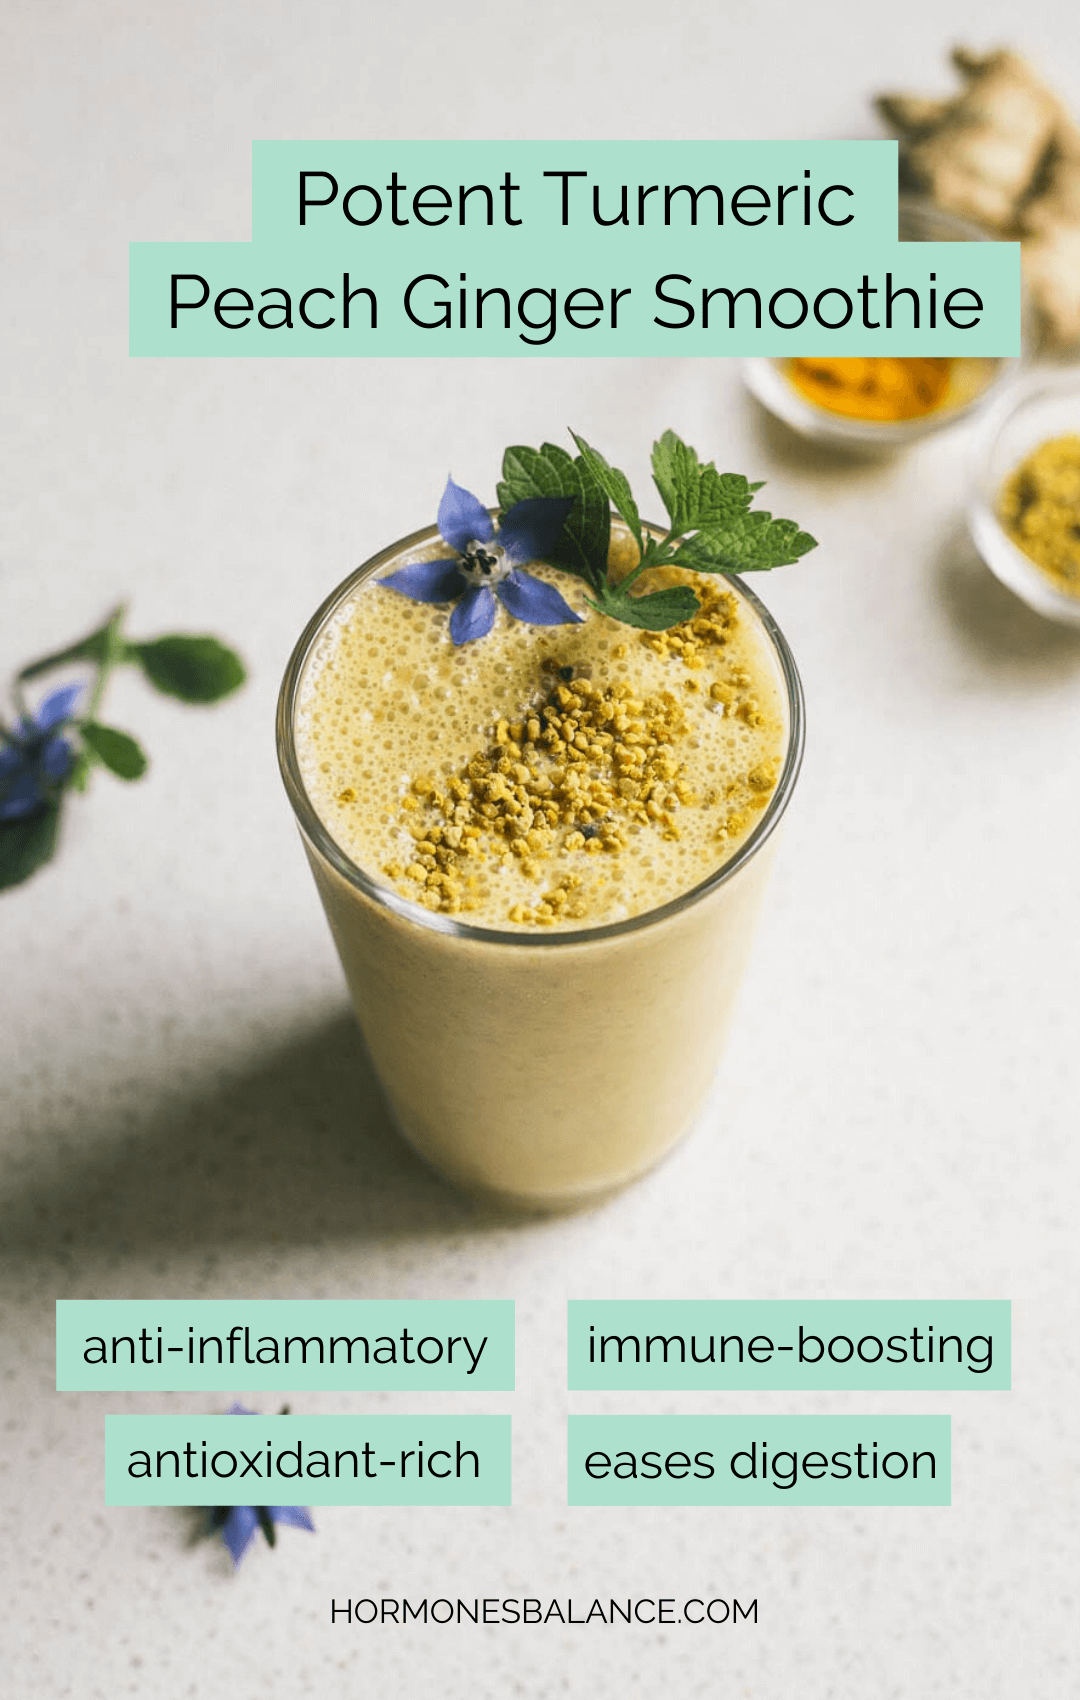 This smoothie uses not one but TWO anti-inflammatory powerhouses—ginger and turmeric.